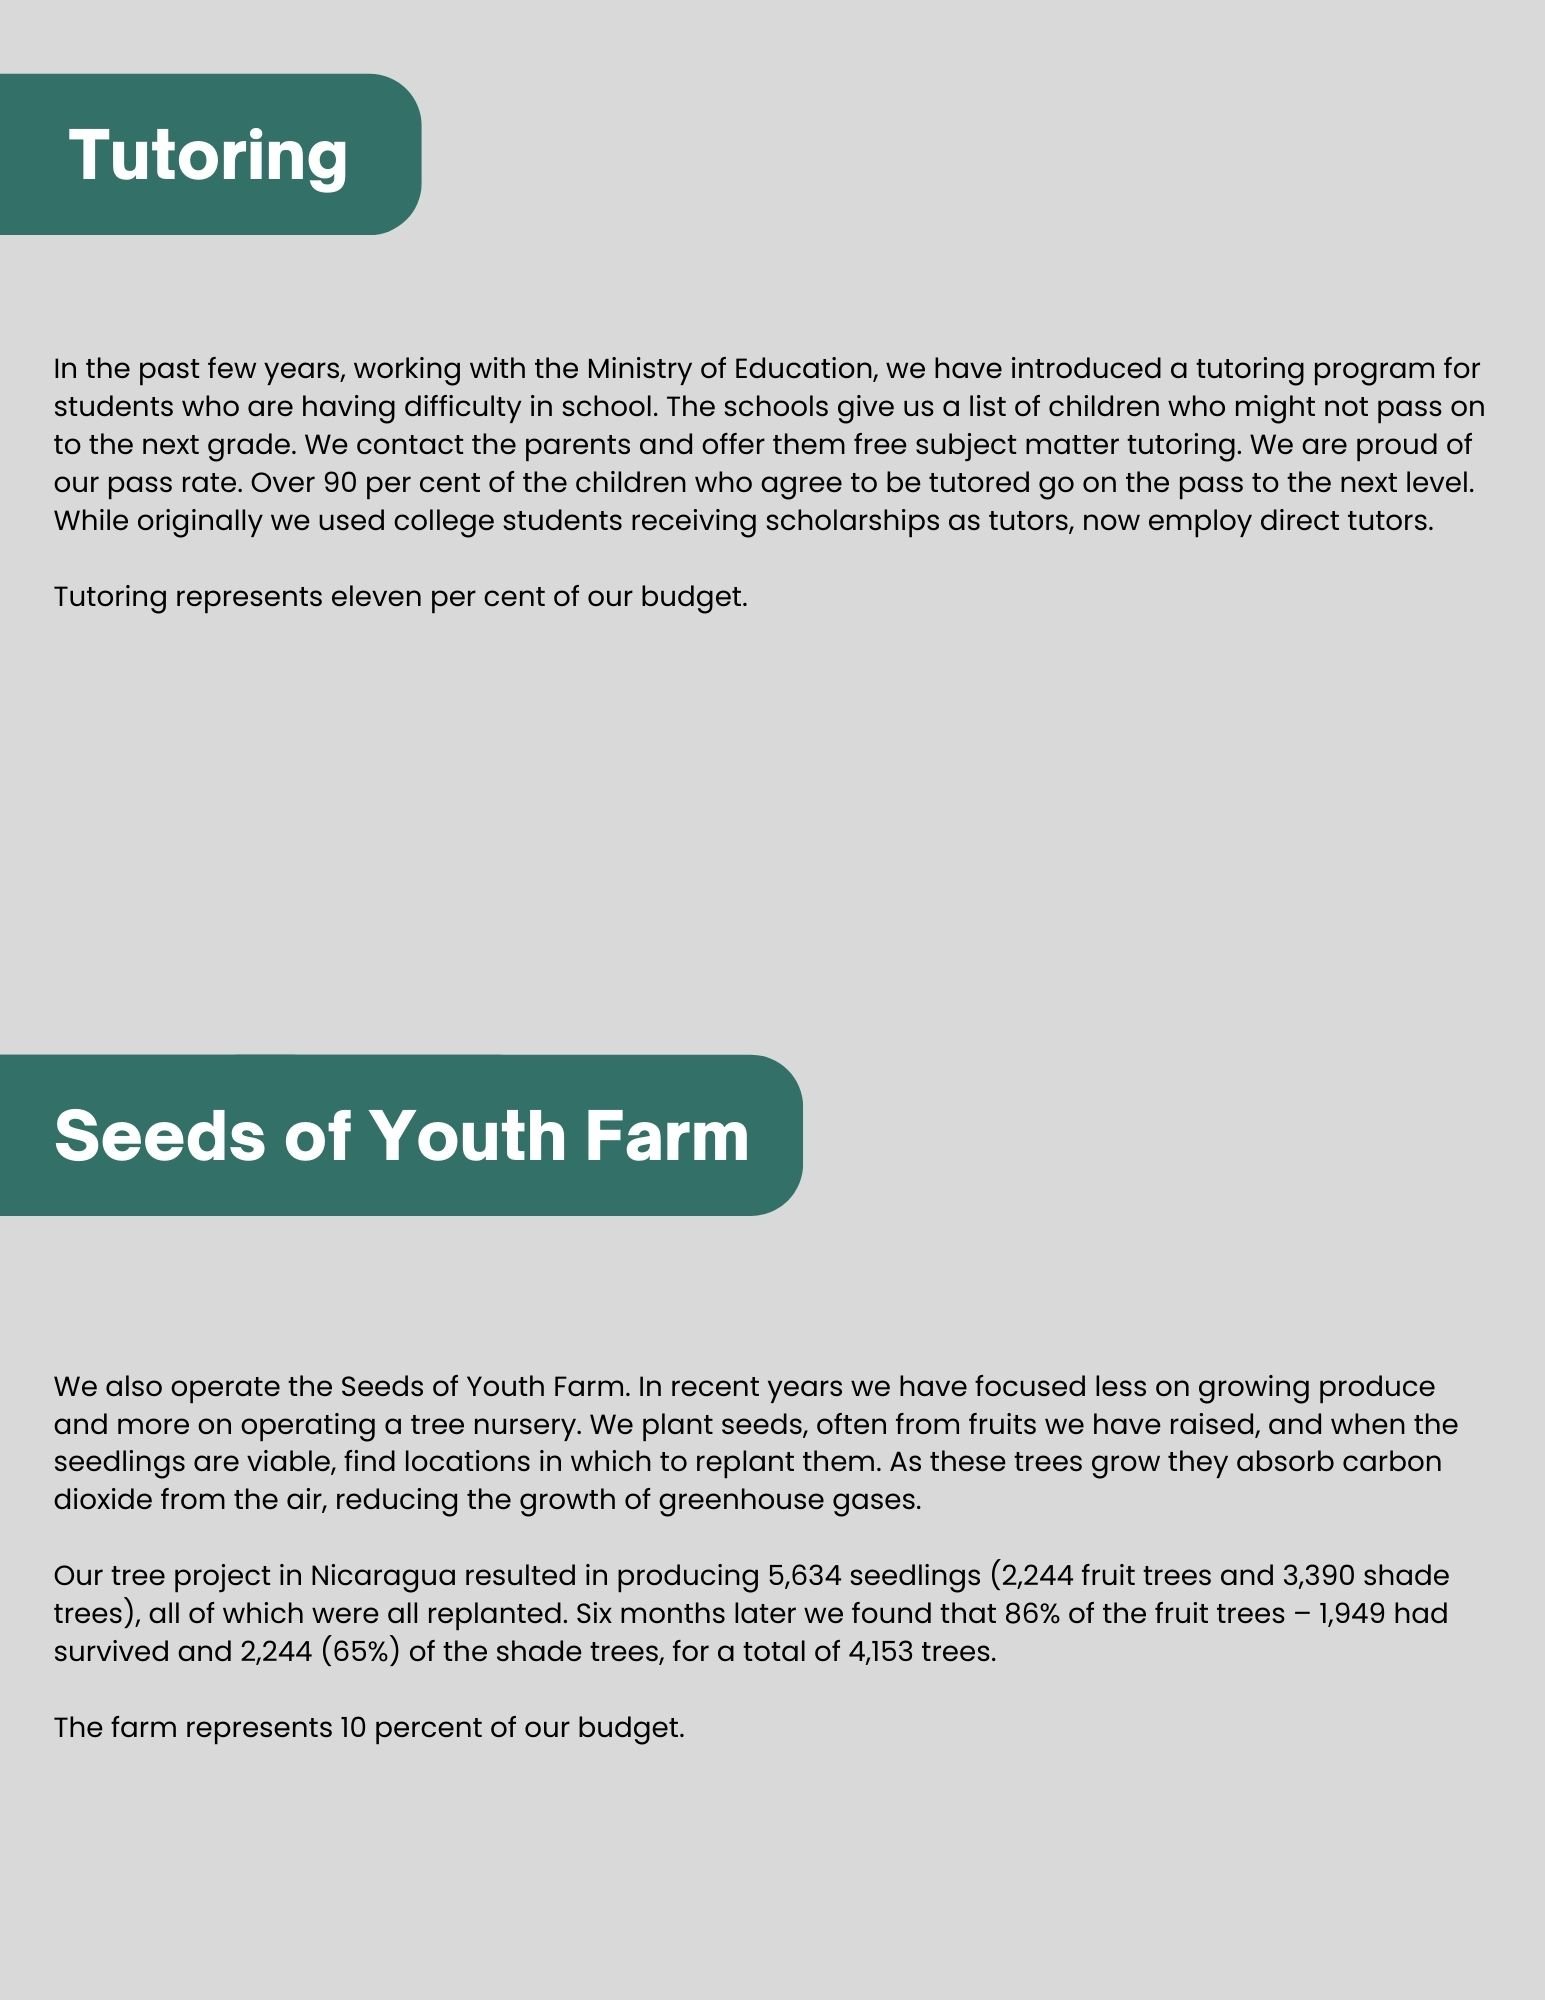 7_Tutoring and Seeds Of Youth Farm_2022.jpg